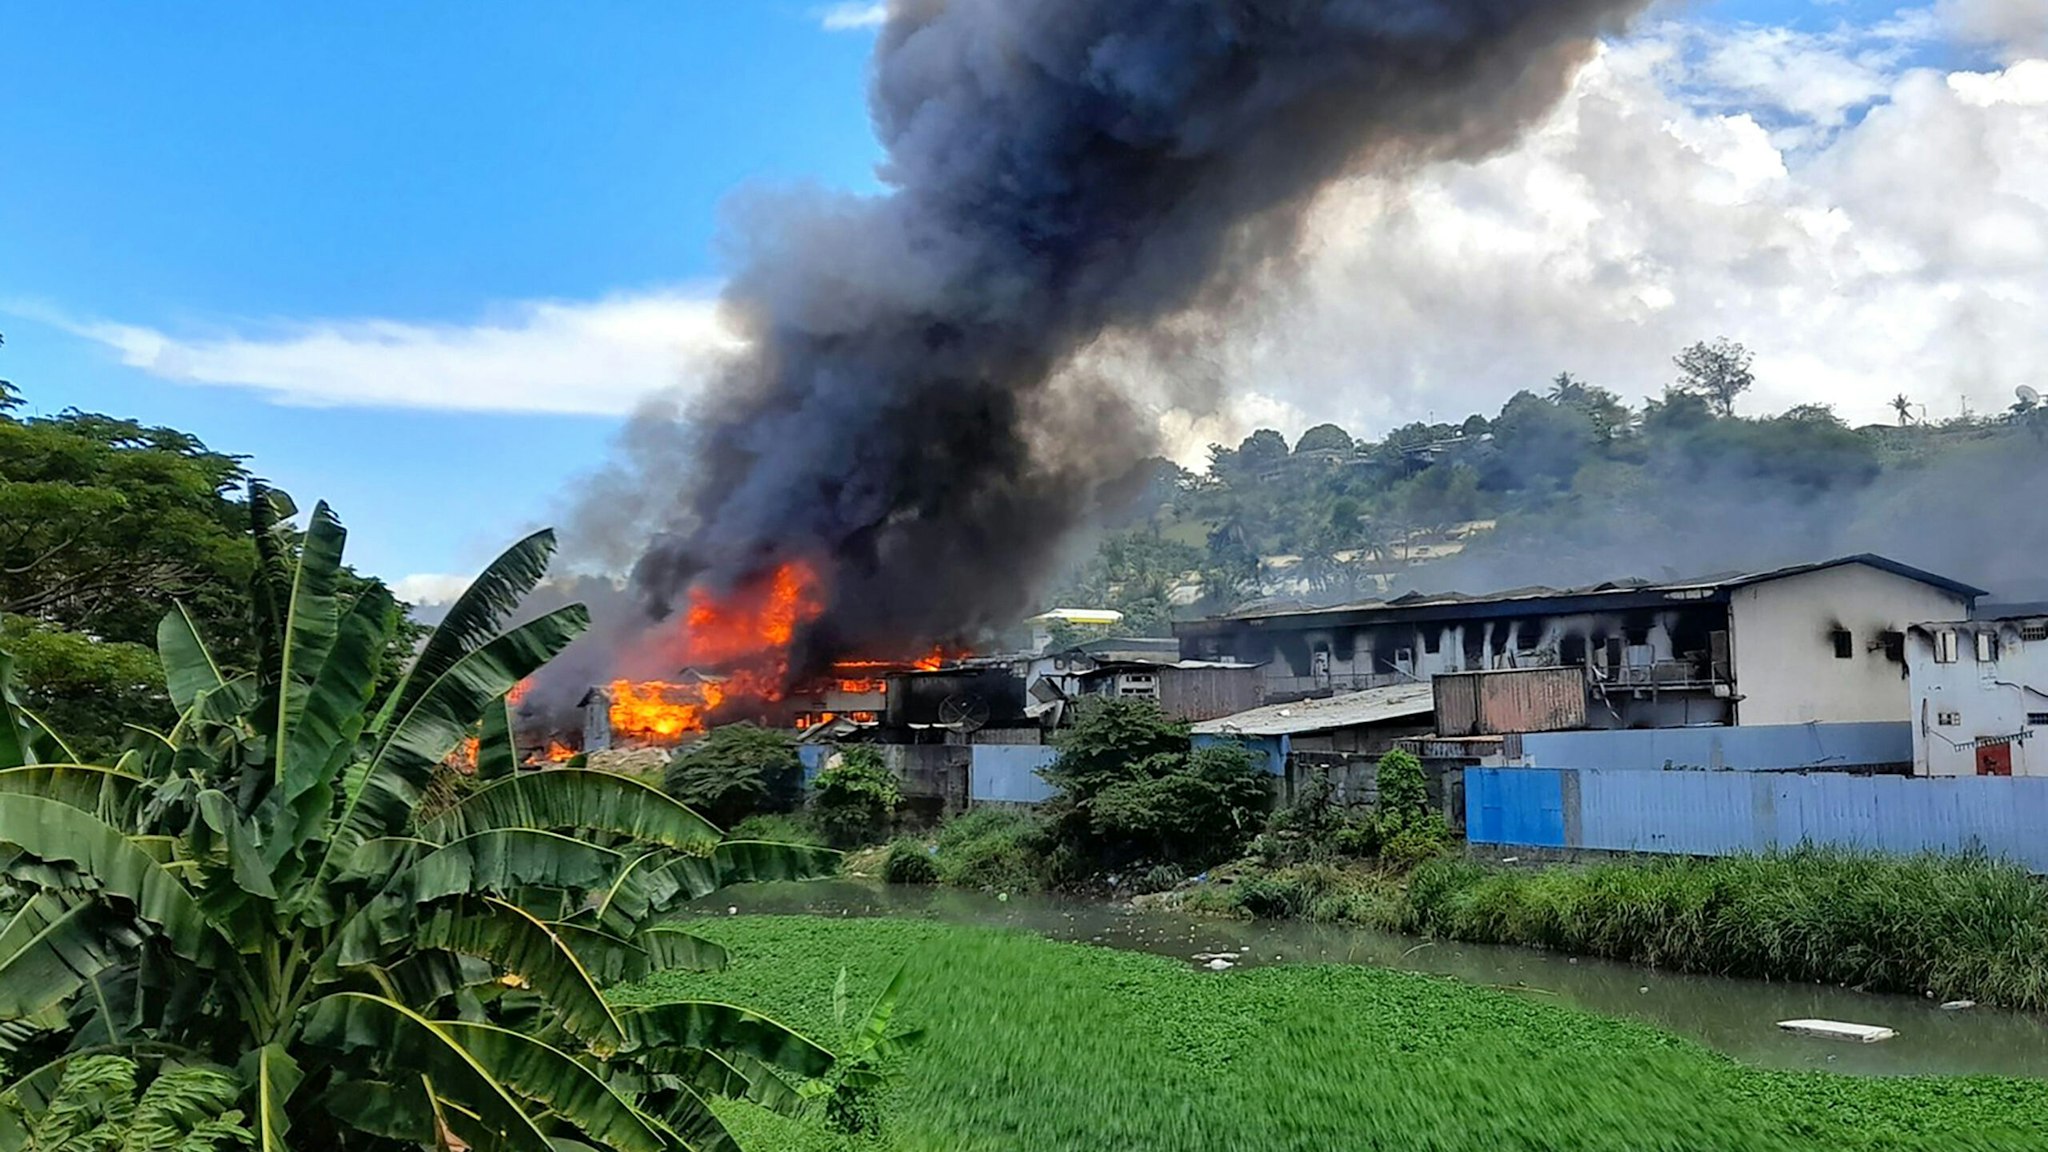 Flames rise from buildings in Honiara's Chinatown on November 26, 2021 as days of rioting have seen thousands ignore a government lockdown order, torching several buildings around the Chinatown district including commercial properties and a bank branch.